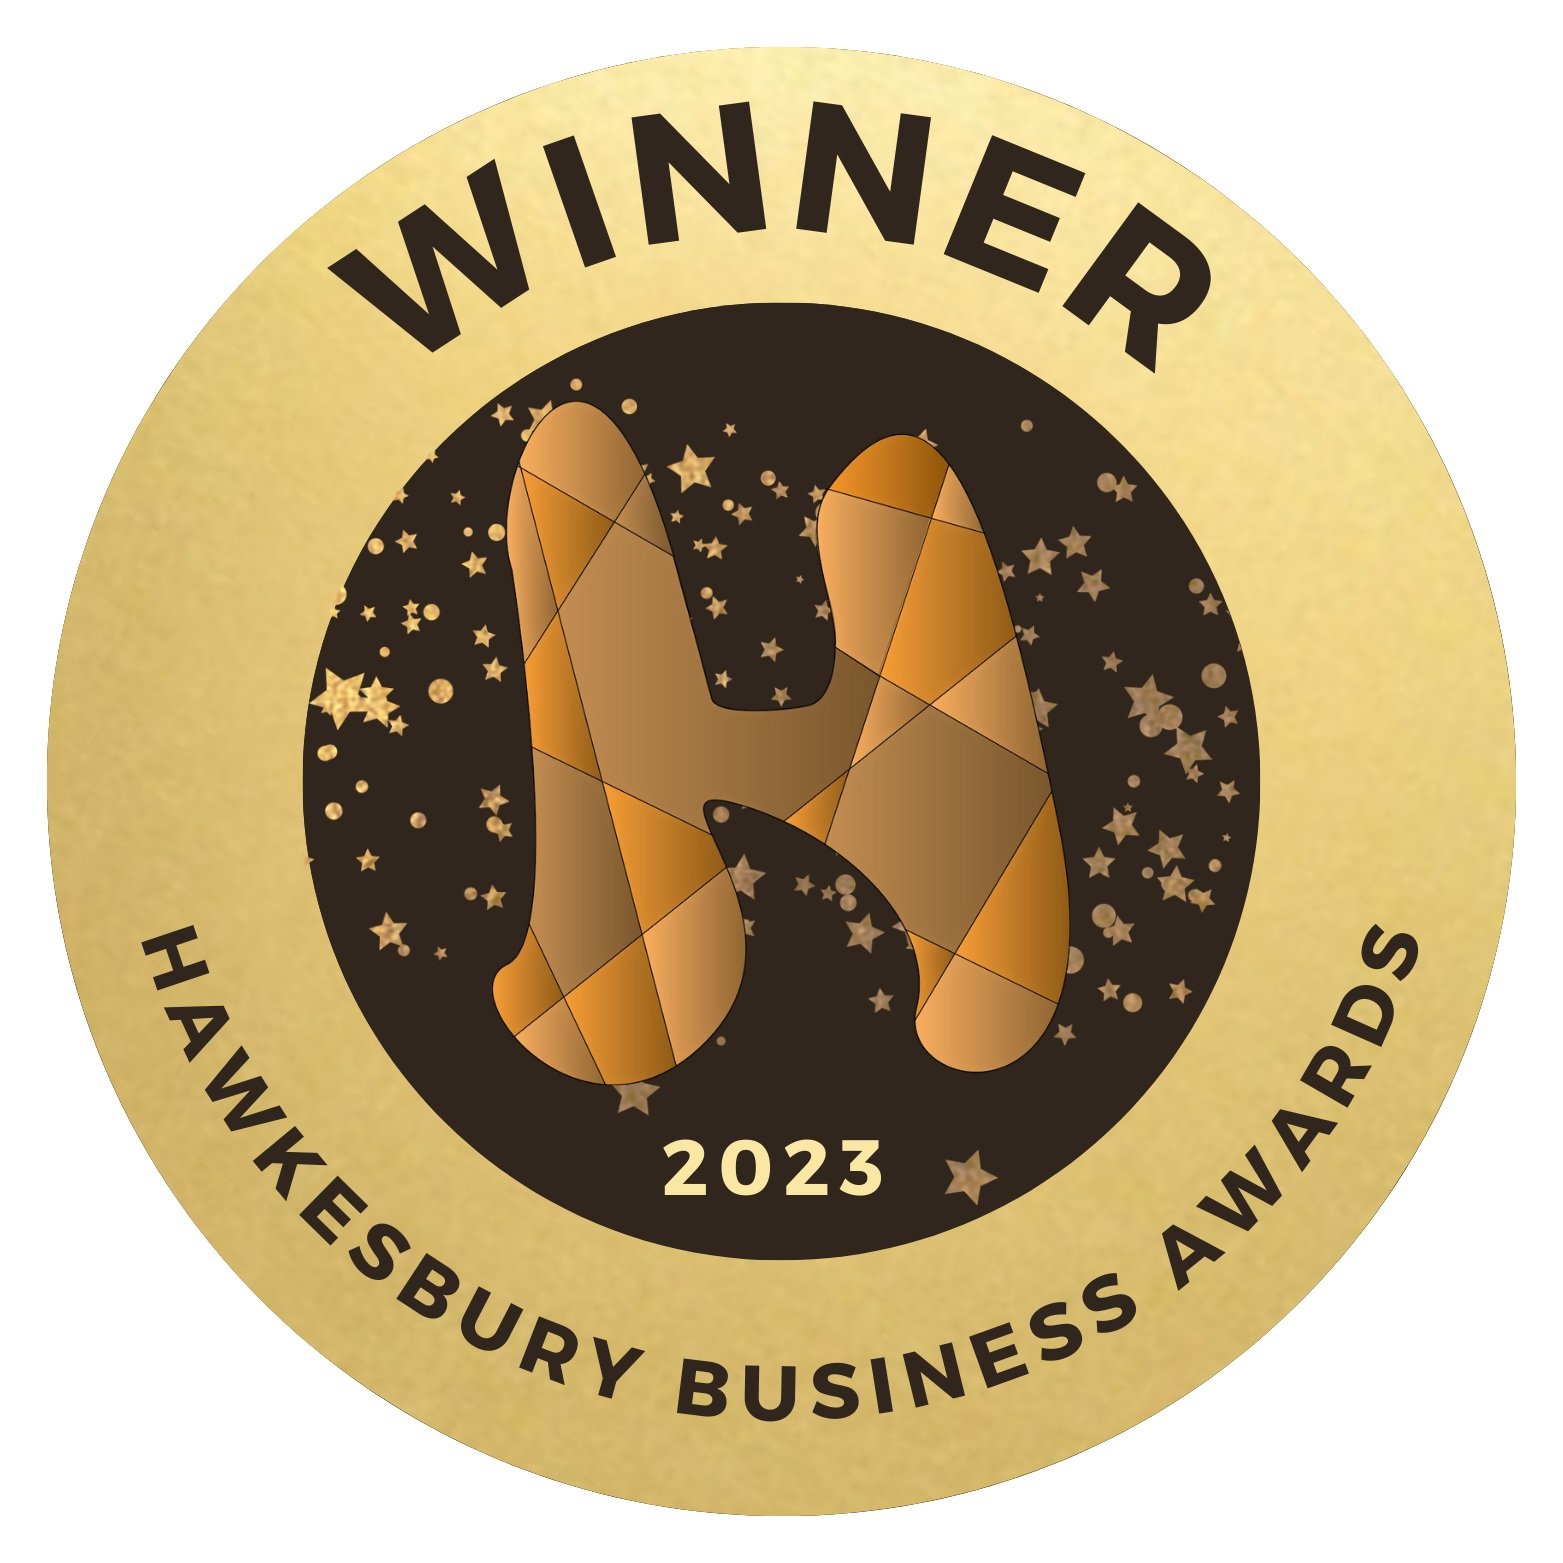 WINNER Business of the Year